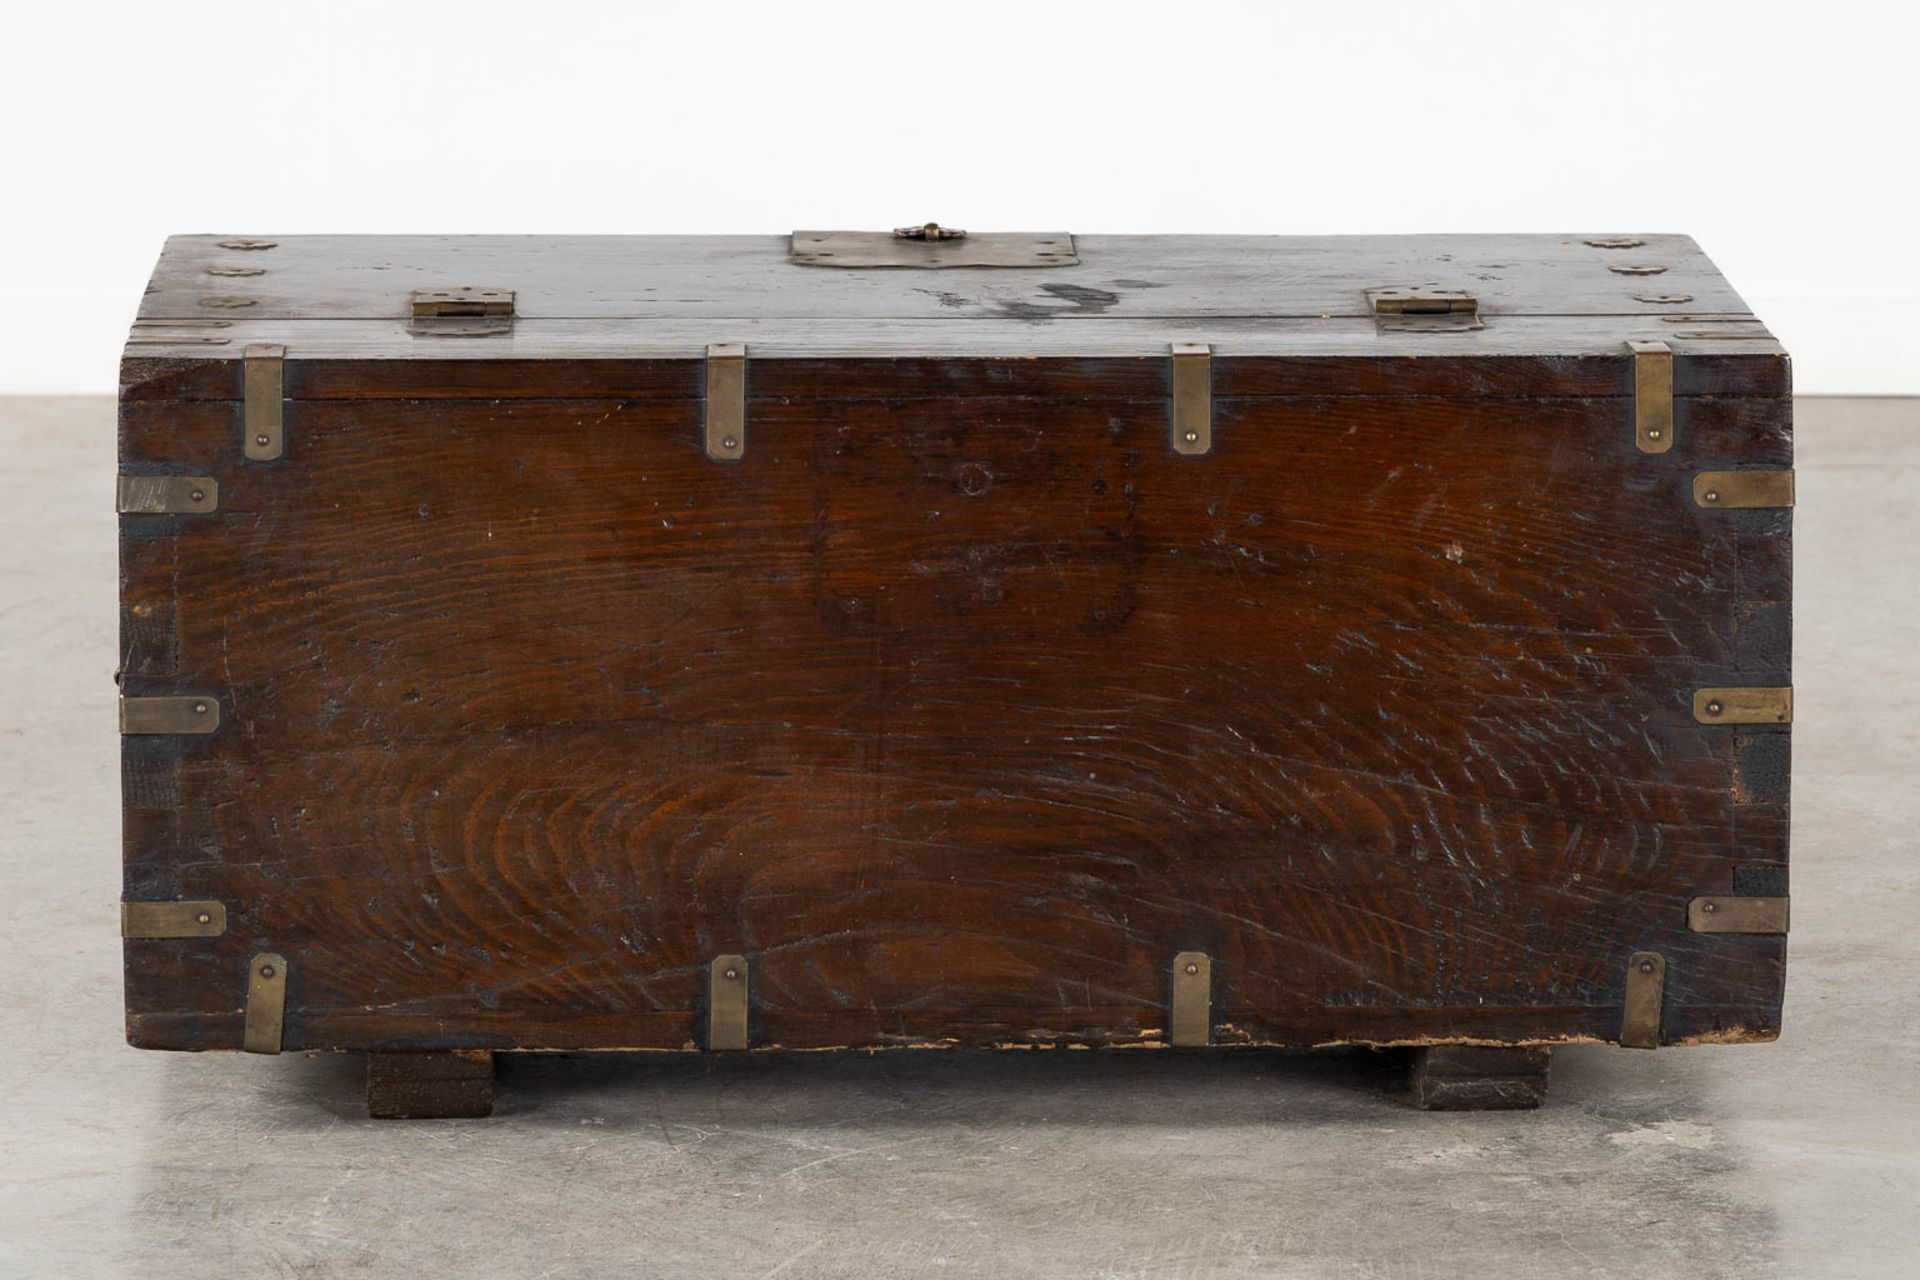 An antique Oriental chest with brass hardware. (L:43 x W:76 x H:40 cm) - Image 6 of 13